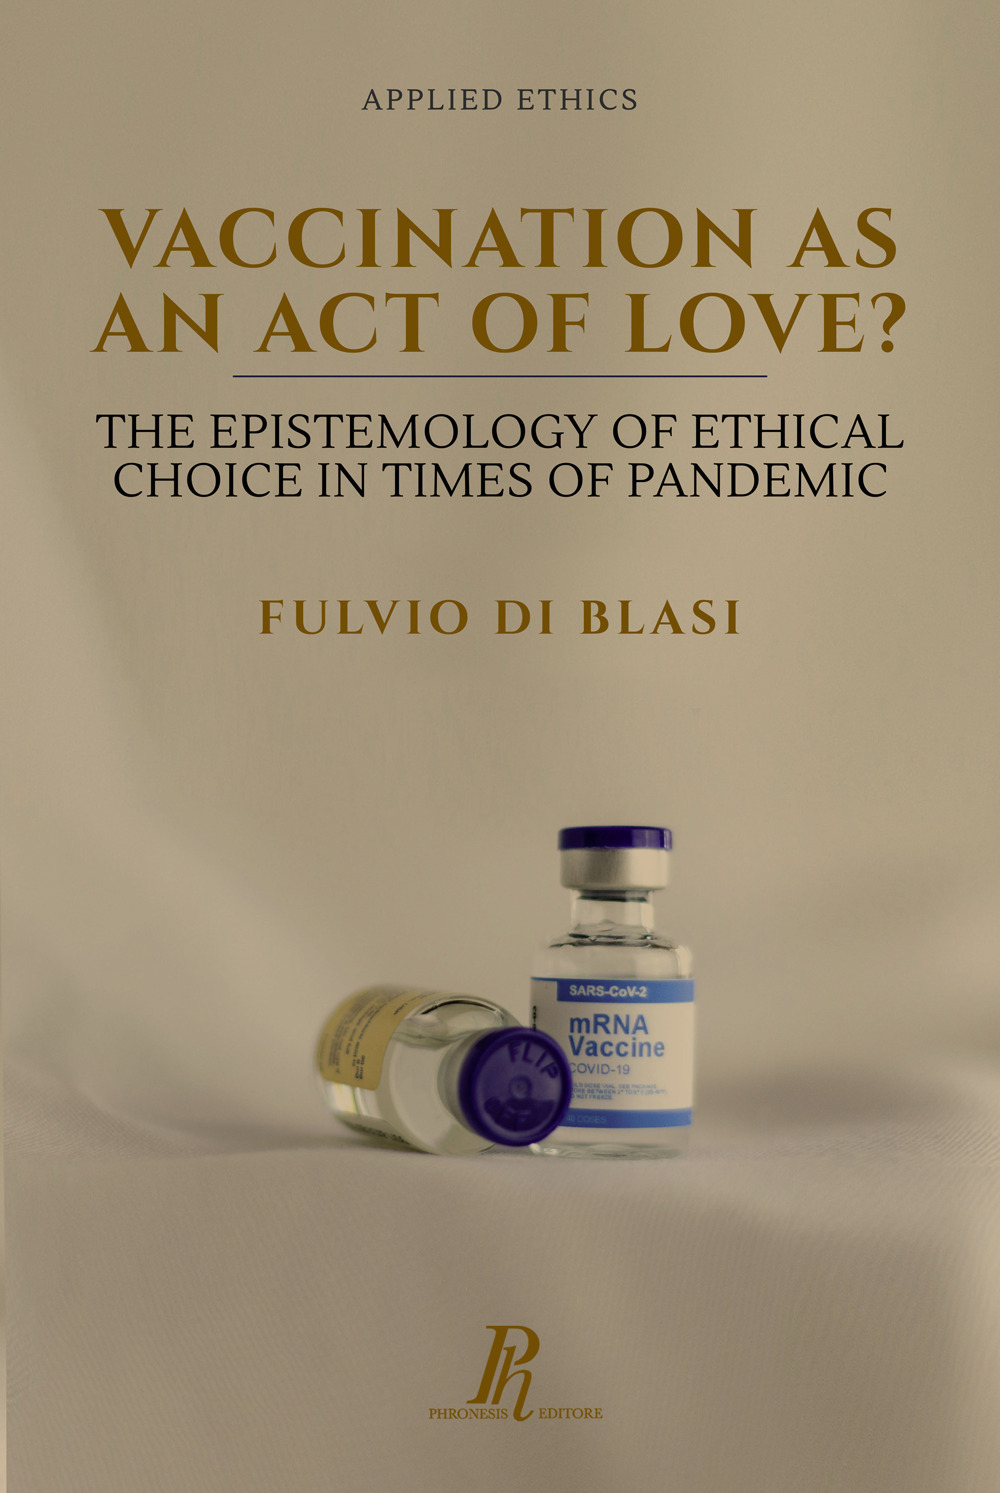 Vaccination as an act of love? The epistemology of ethical choice in times of pandemic